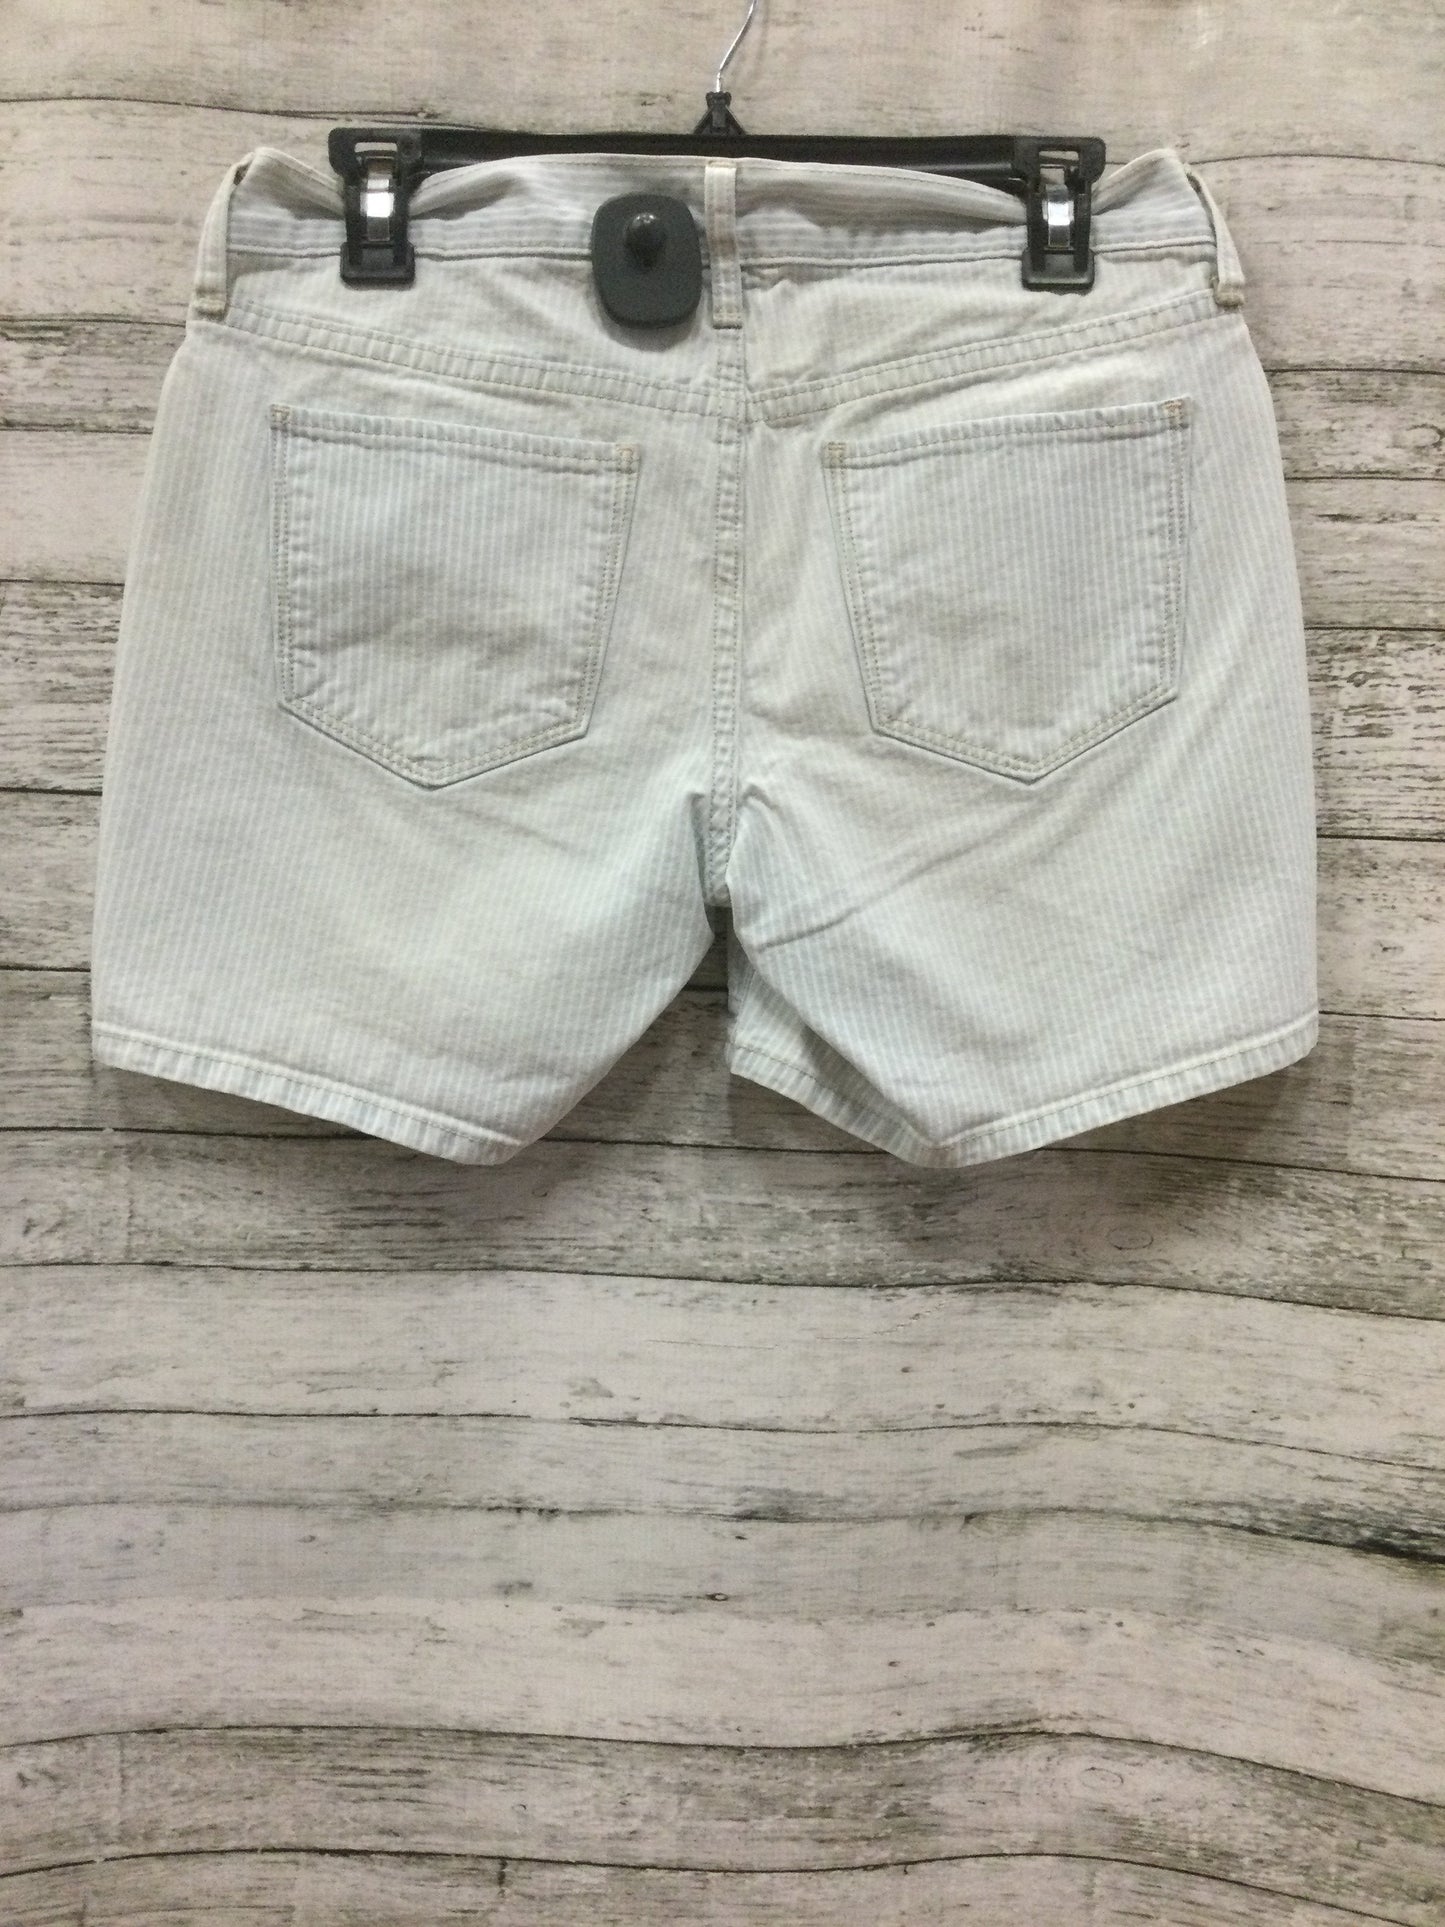 Shorts By Old Navy  Size: 2